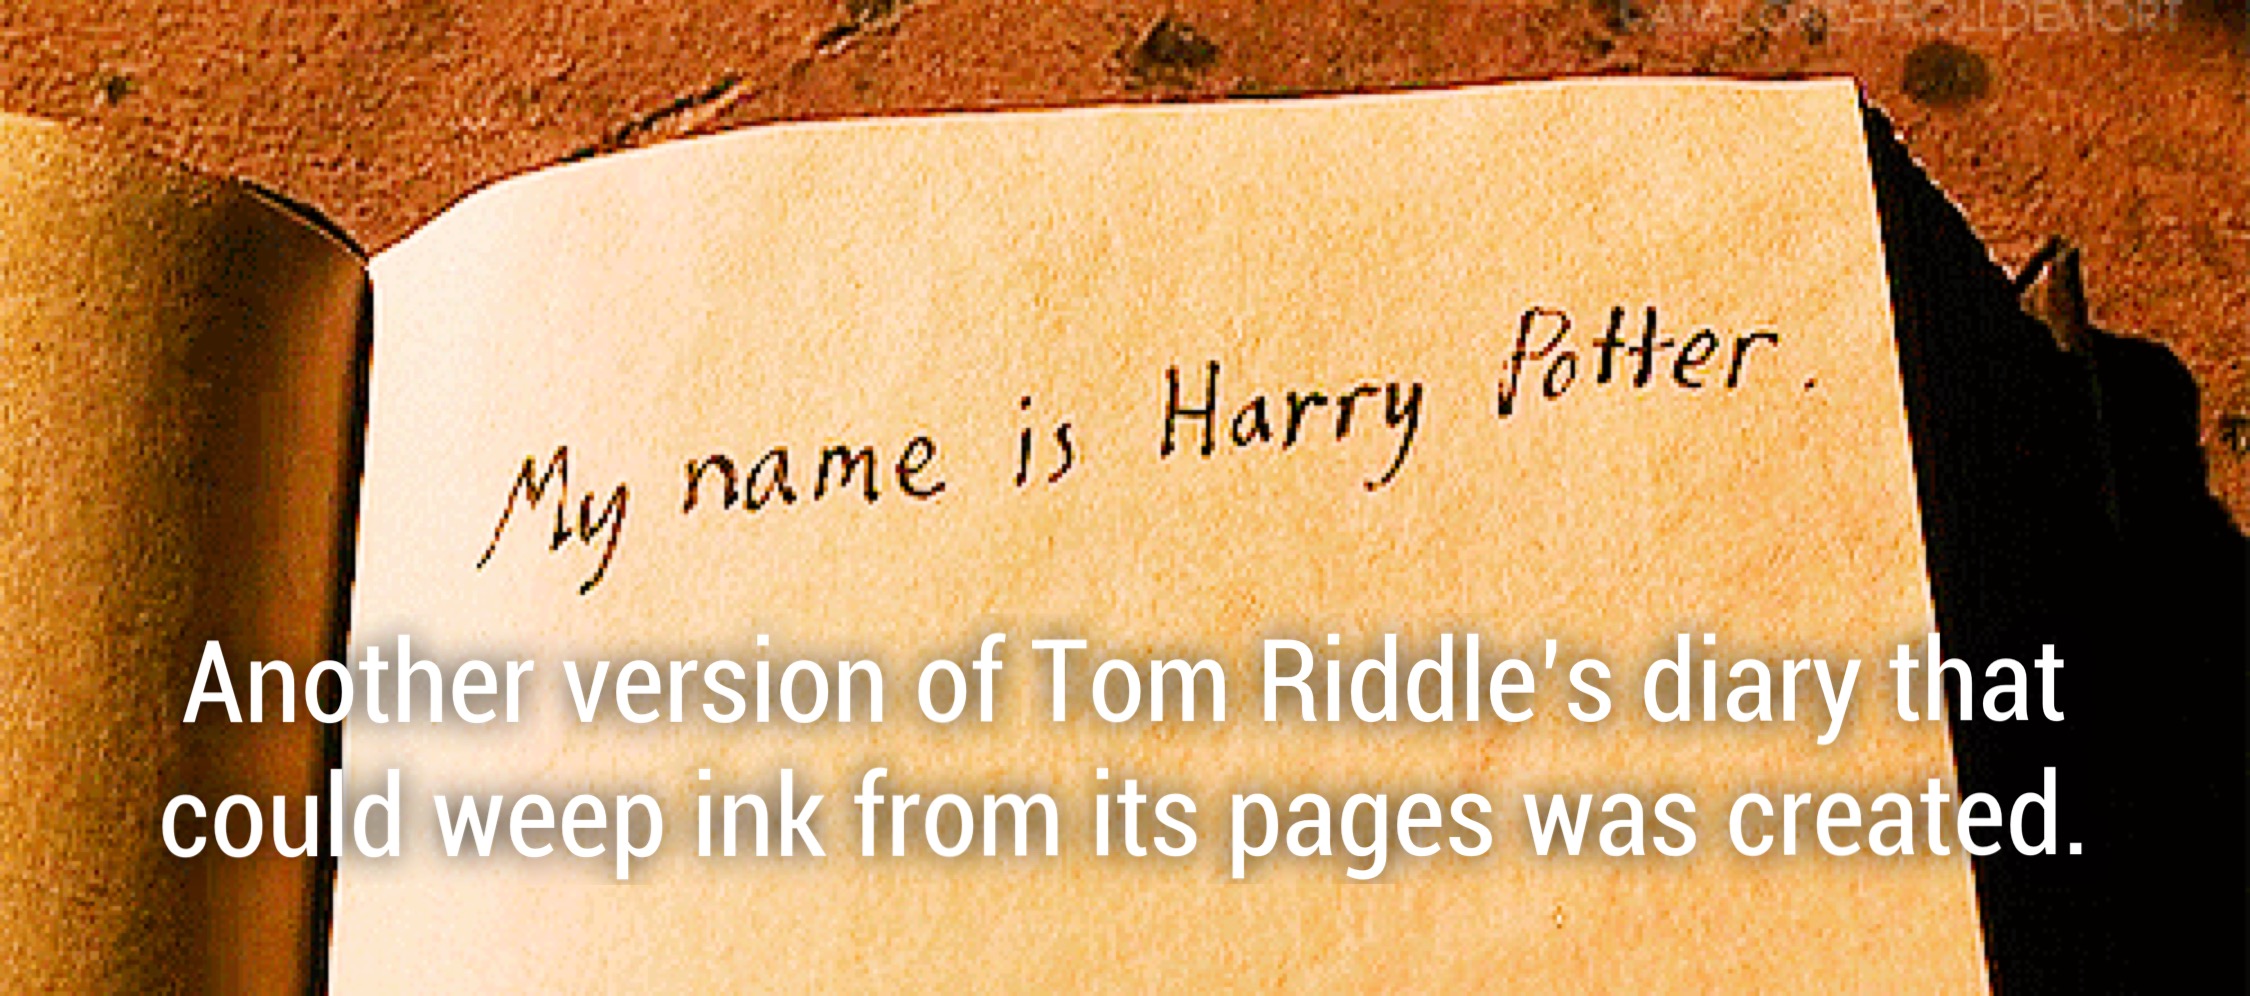 my name is harry potter - My name is Harry Potter Another version of Tom Riddle's diary that could weep ink from its pages was created.